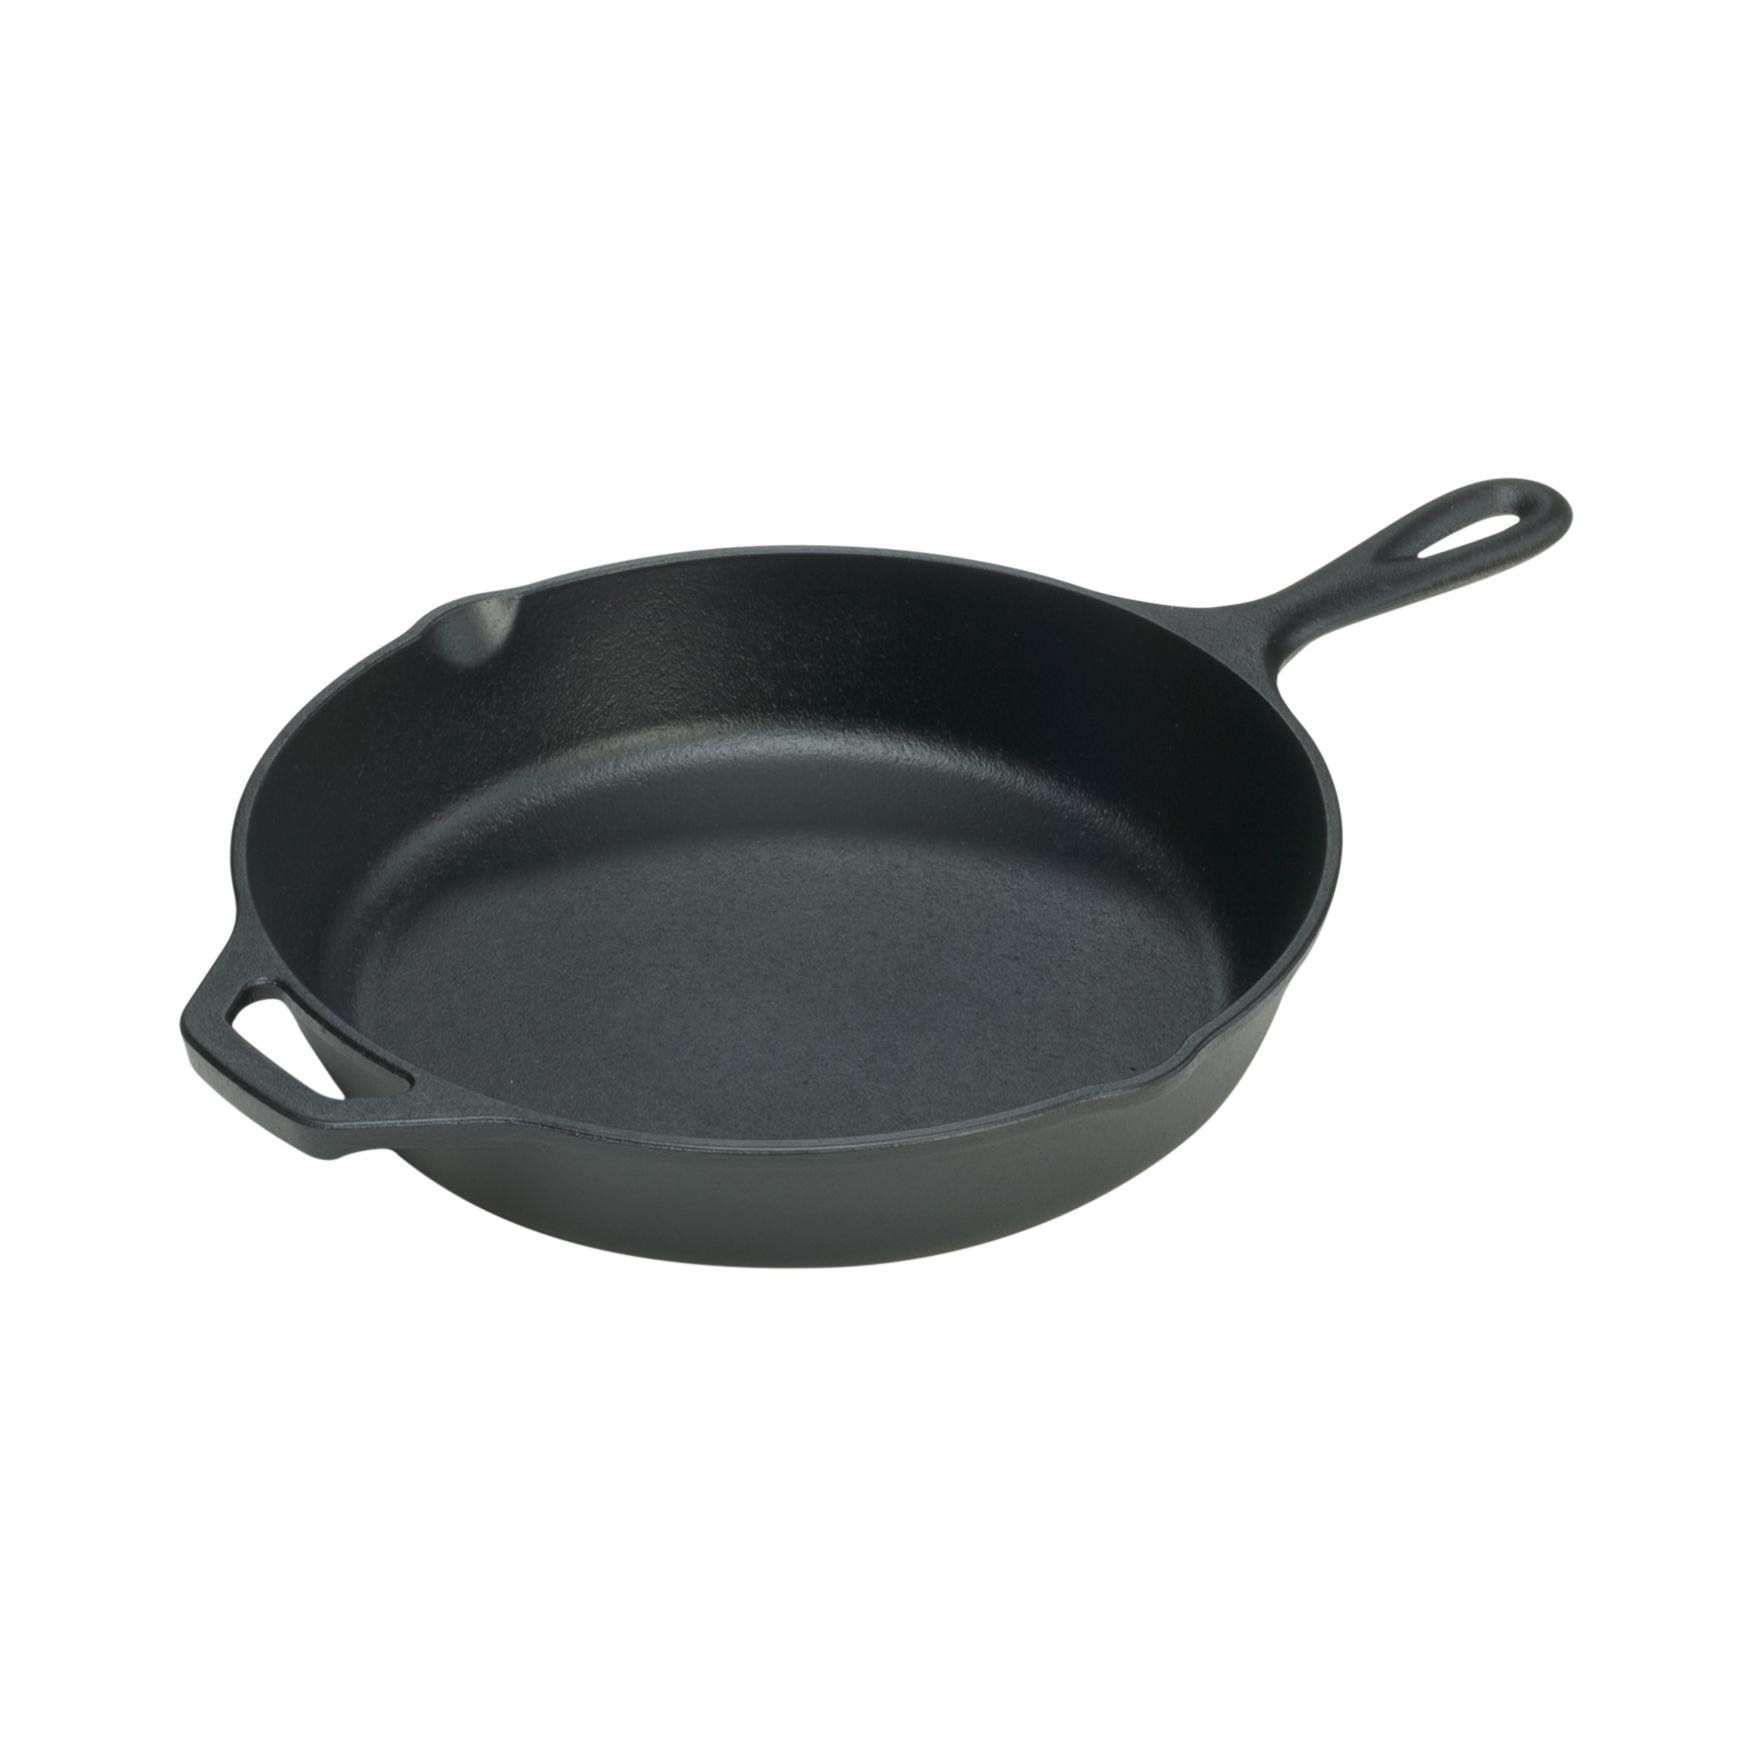 Why We Love the Lodge Pre-Seasoned Cast Iron Skillet